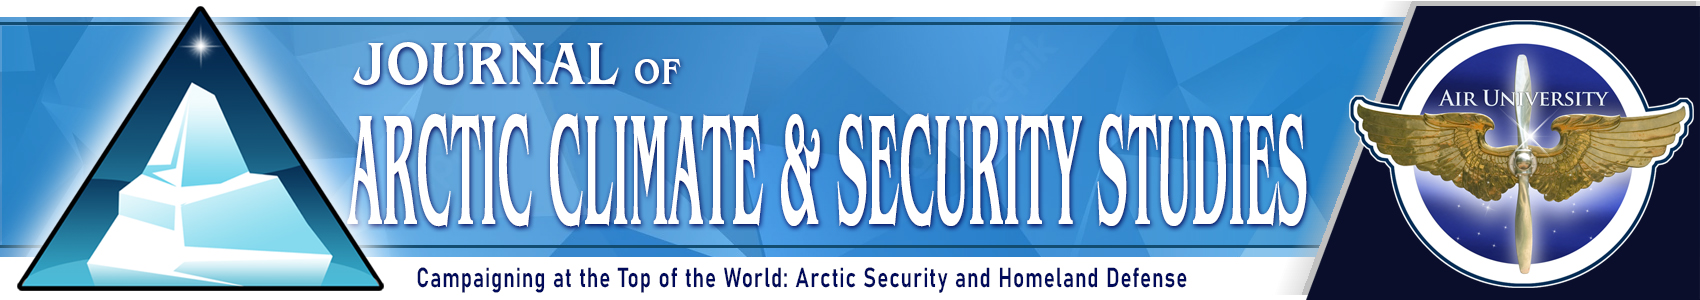 Journal of Arctic Climate and Security Studies